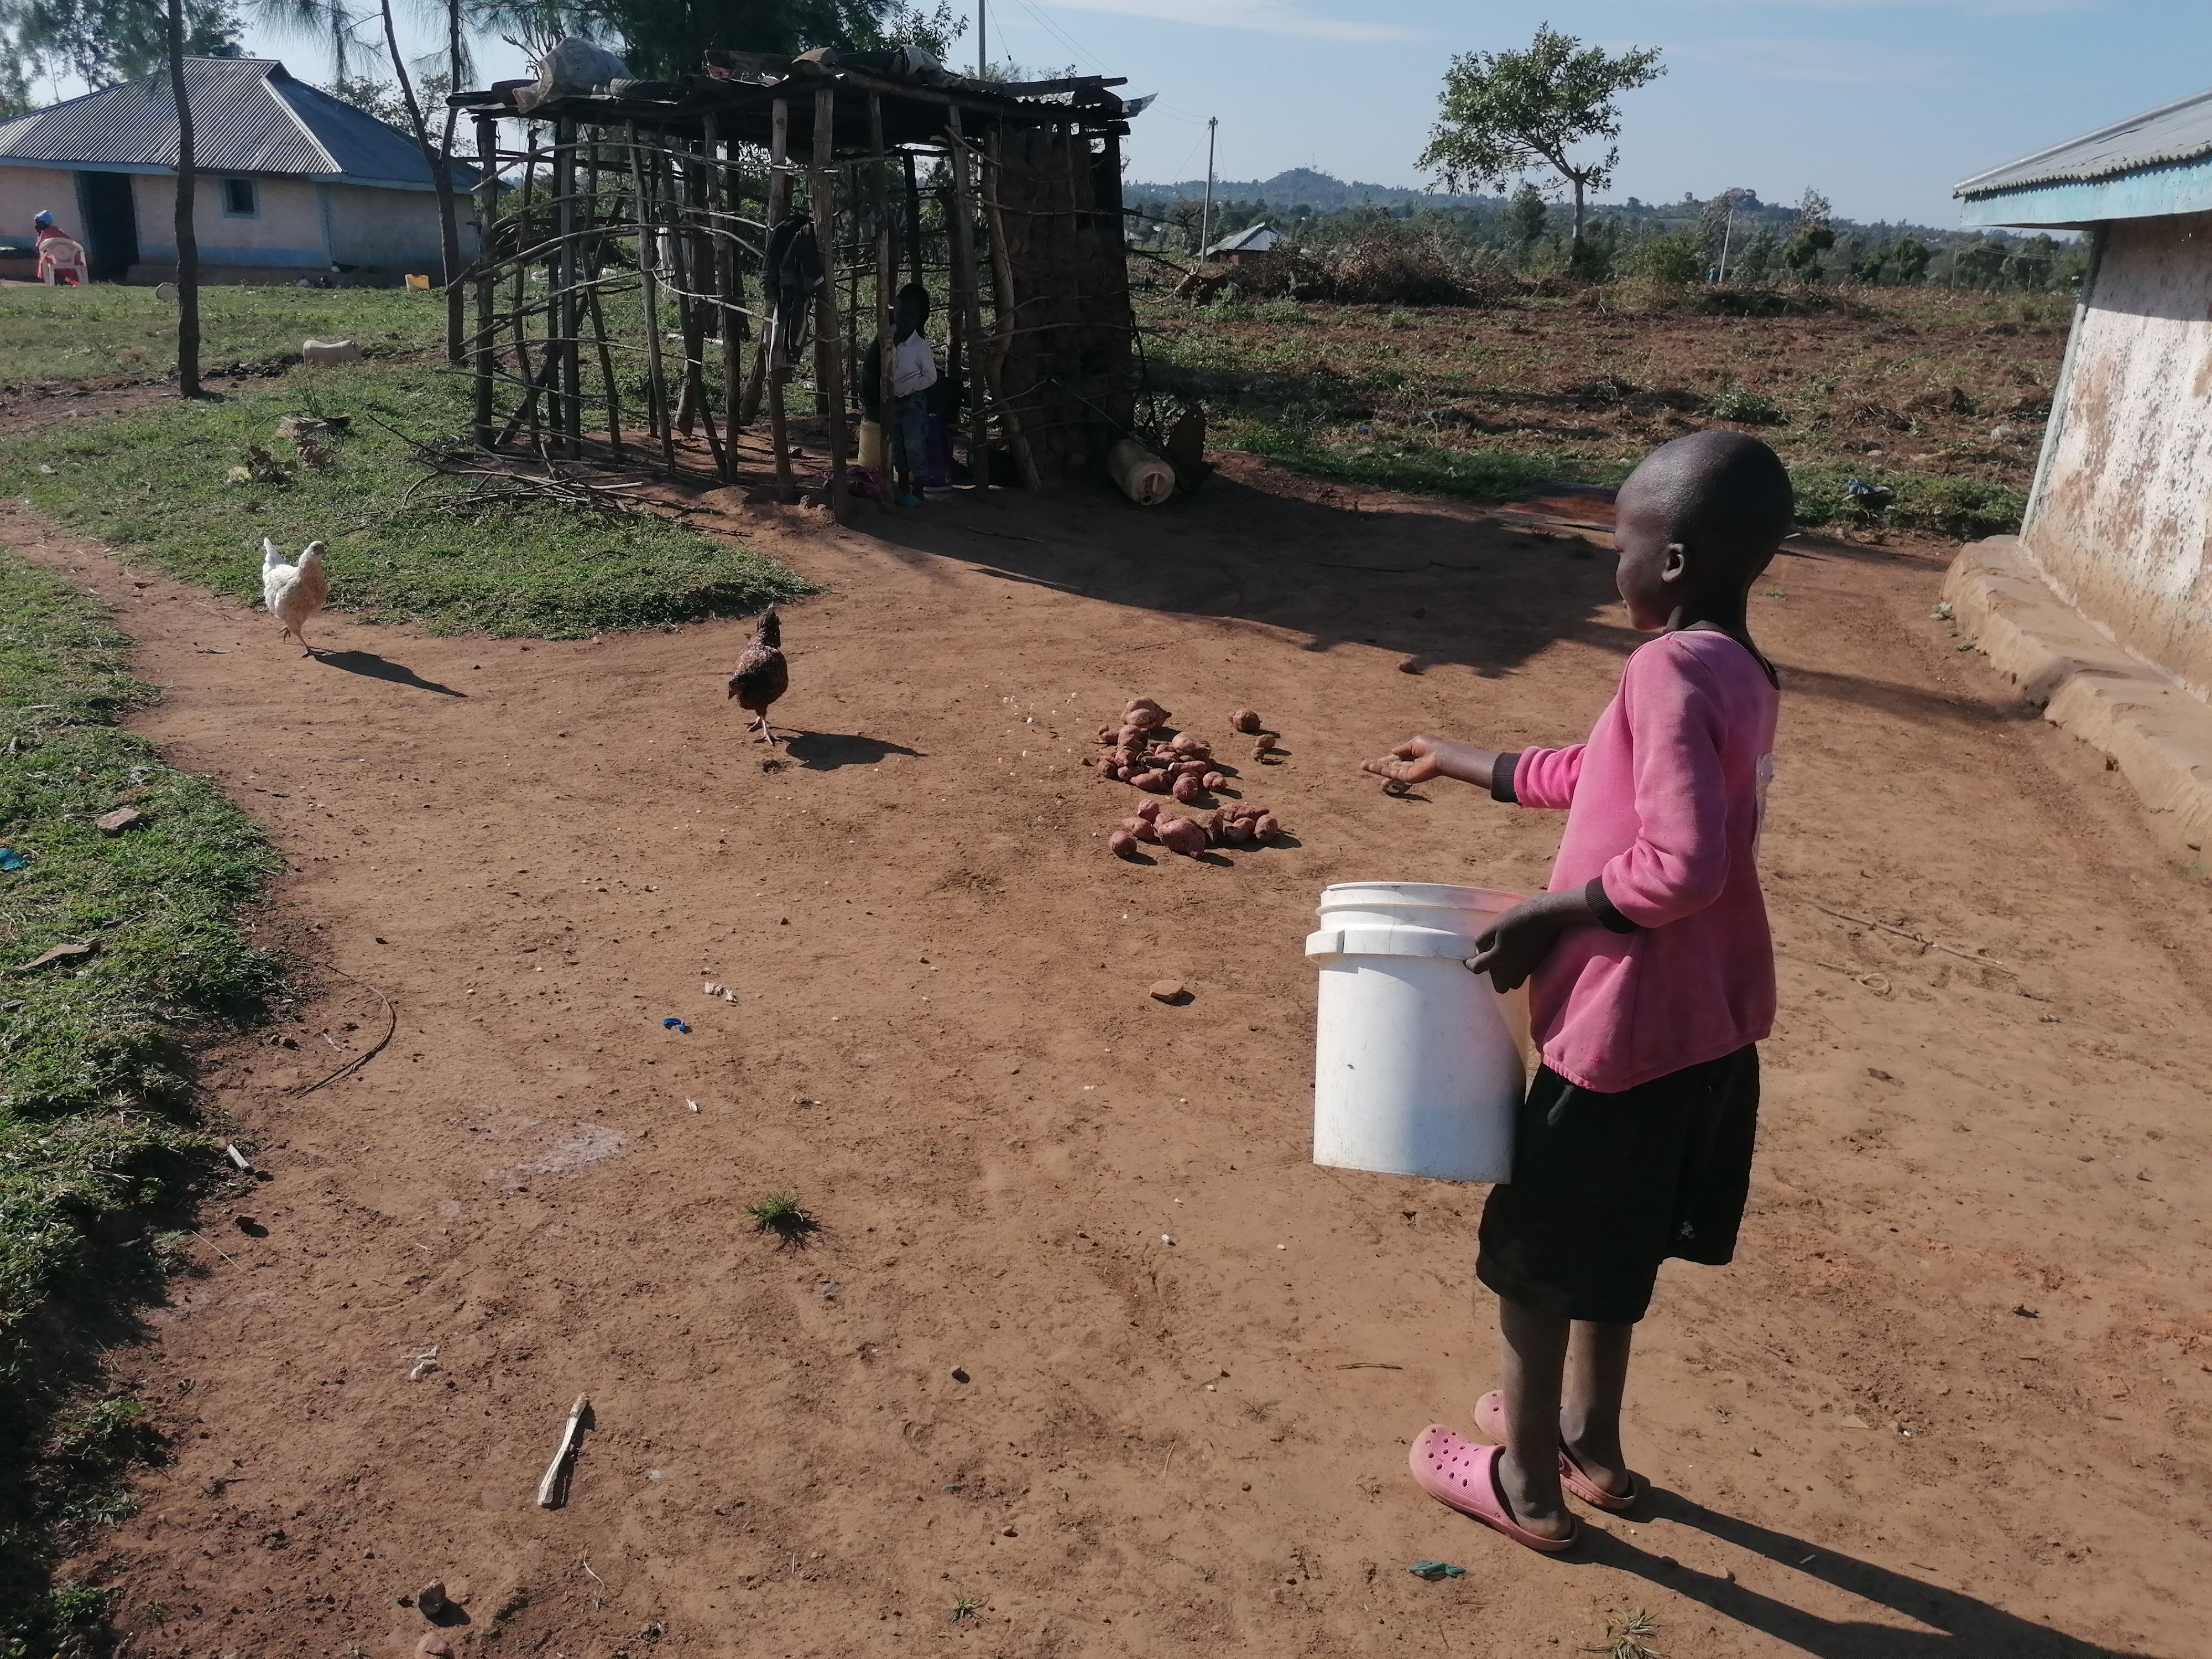 Elly is now eight years old and in the first grade at Magongo Ribe Primary School. Taking care of the chickens is his responsibility, and his mother proudly says her son is very good with animals.